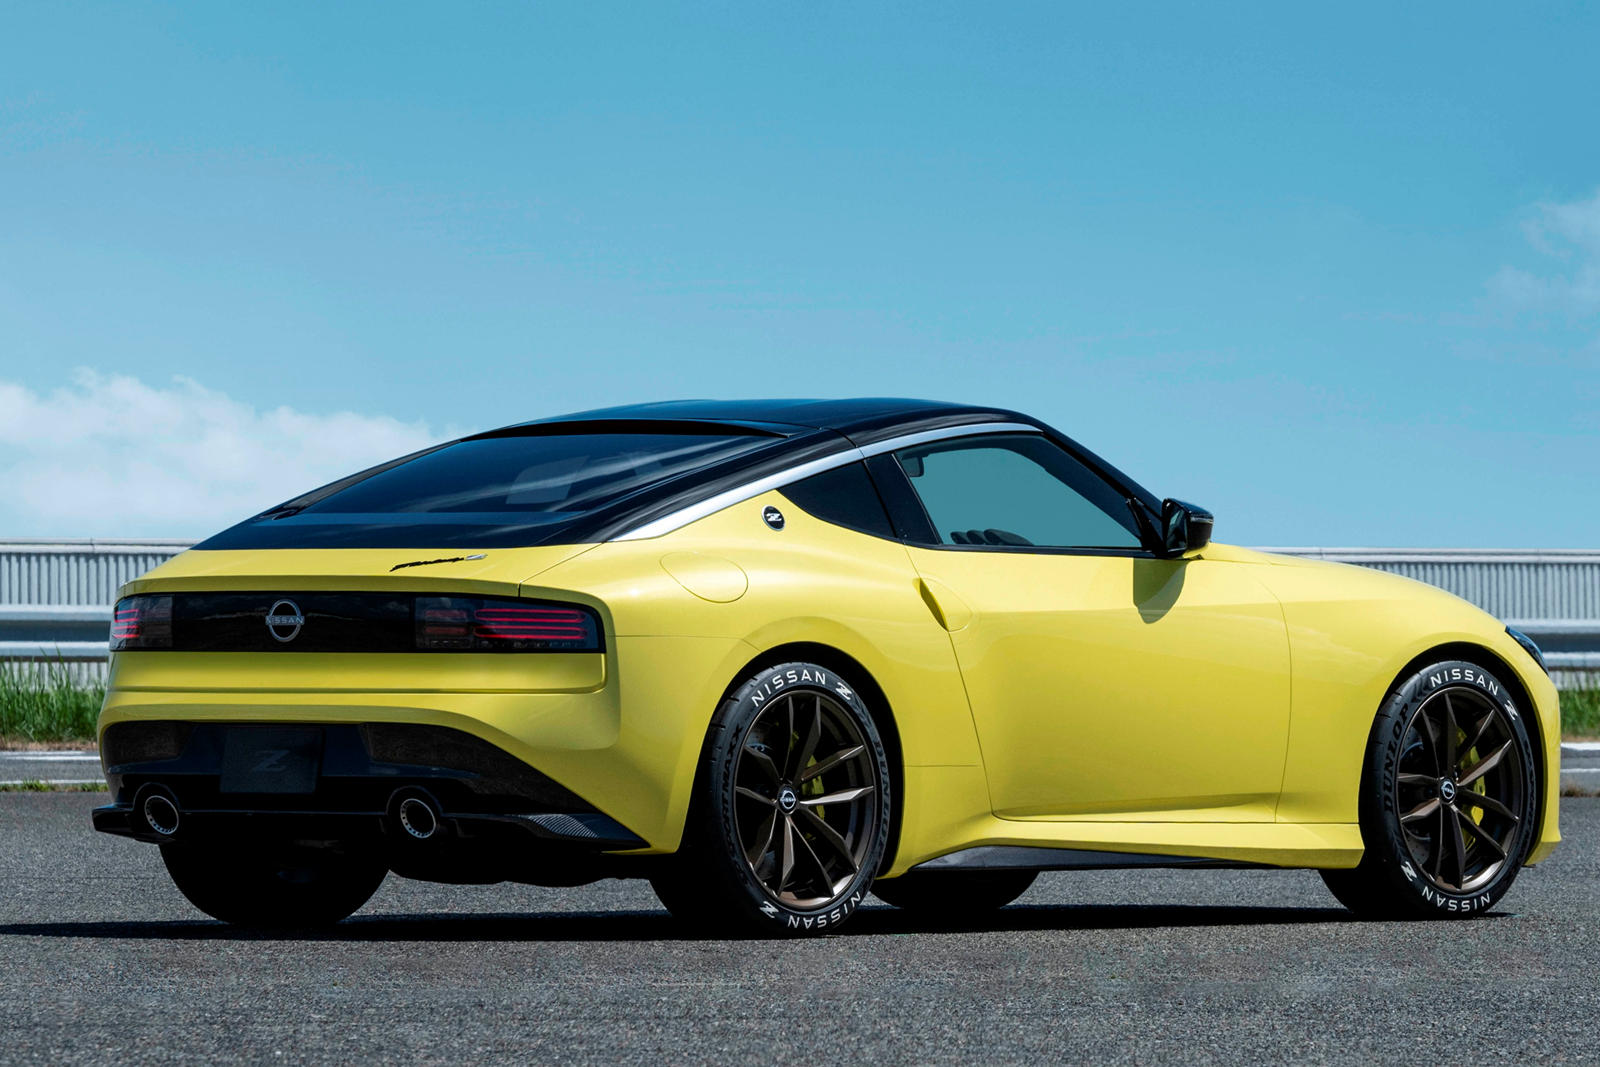 It would appear that the New Nissan Z Will Have Infiniti’s Twin-Turbo 3.0L V6